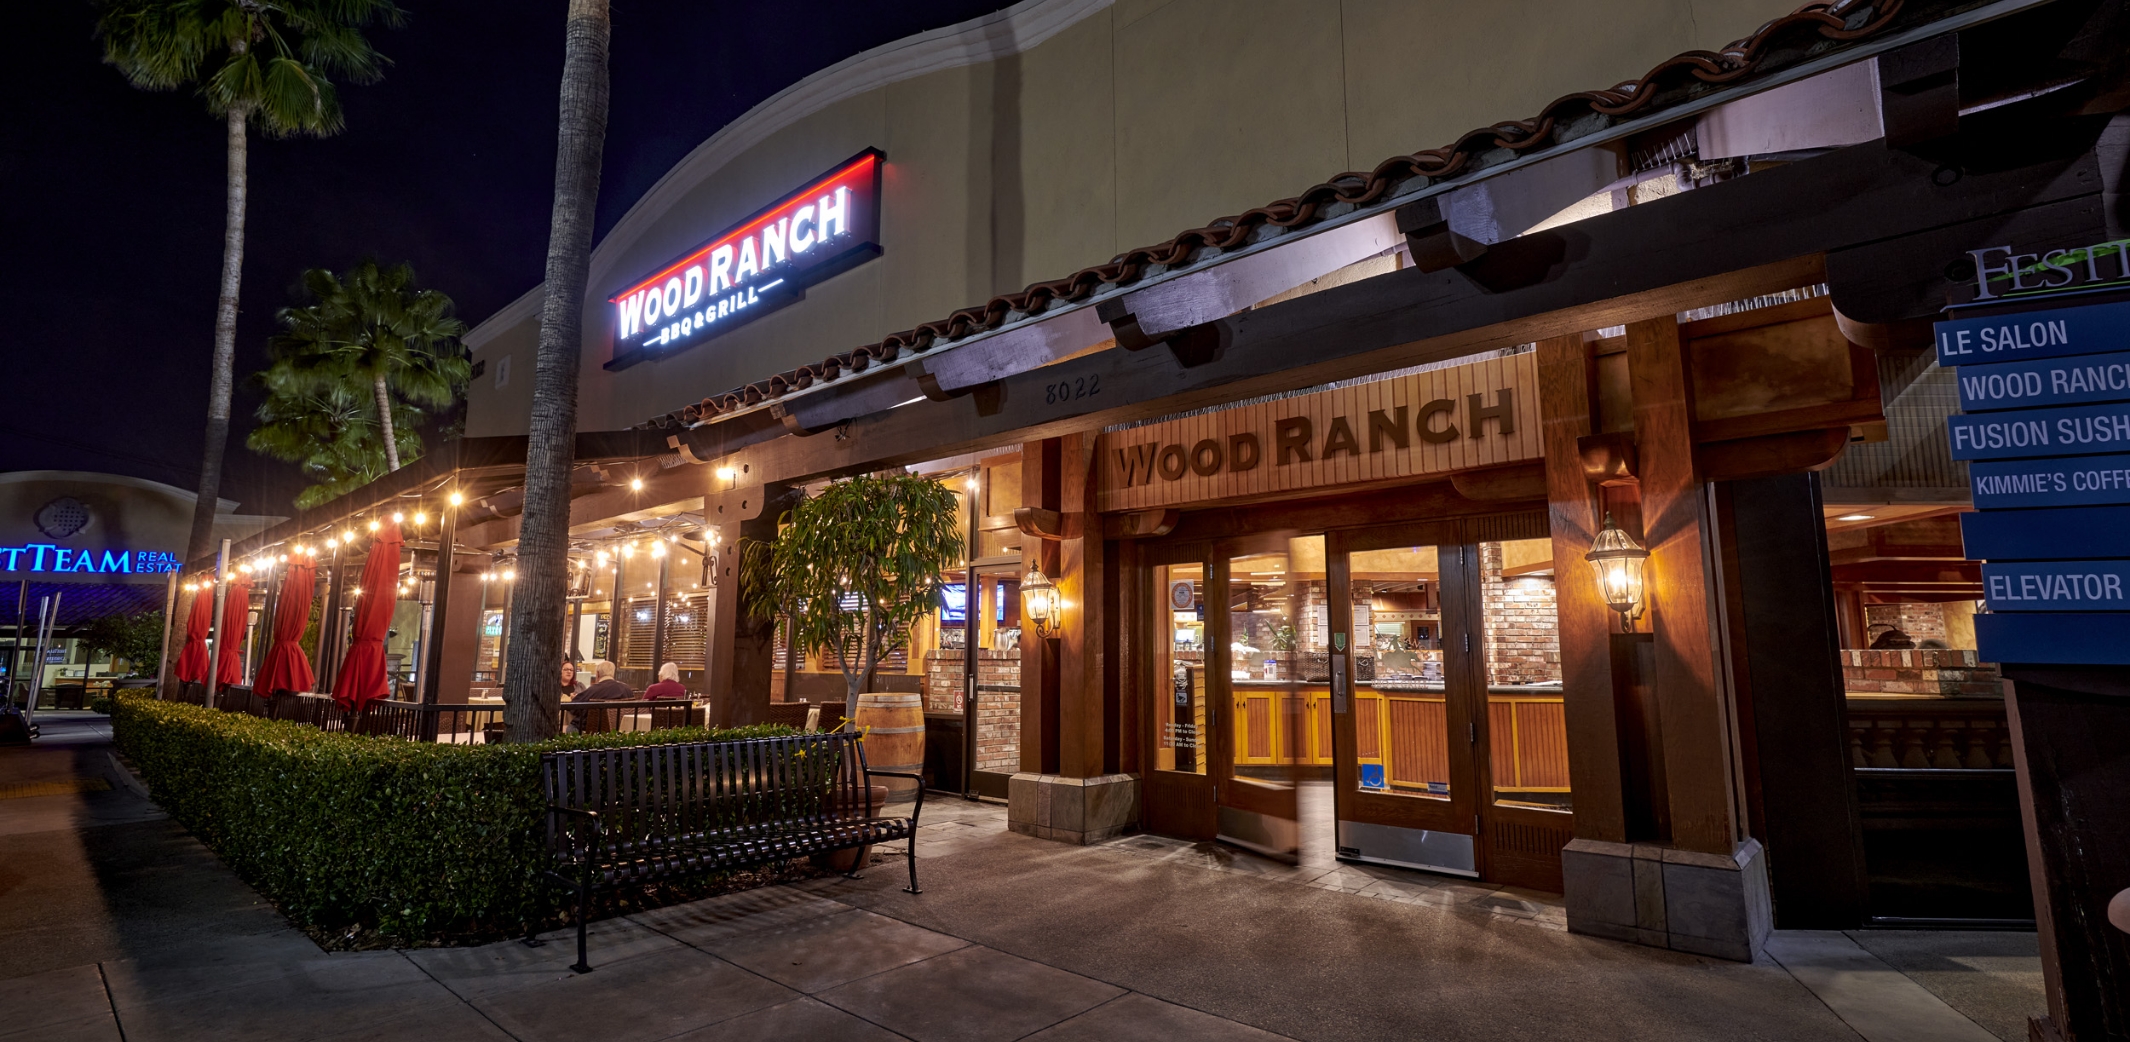 Exterior view of Wood Ranch BBQ & Grill Aneheim in the evening, featuring warm lighting and a welcoming entrance with lush palm trees and an inviting outdoor seating area